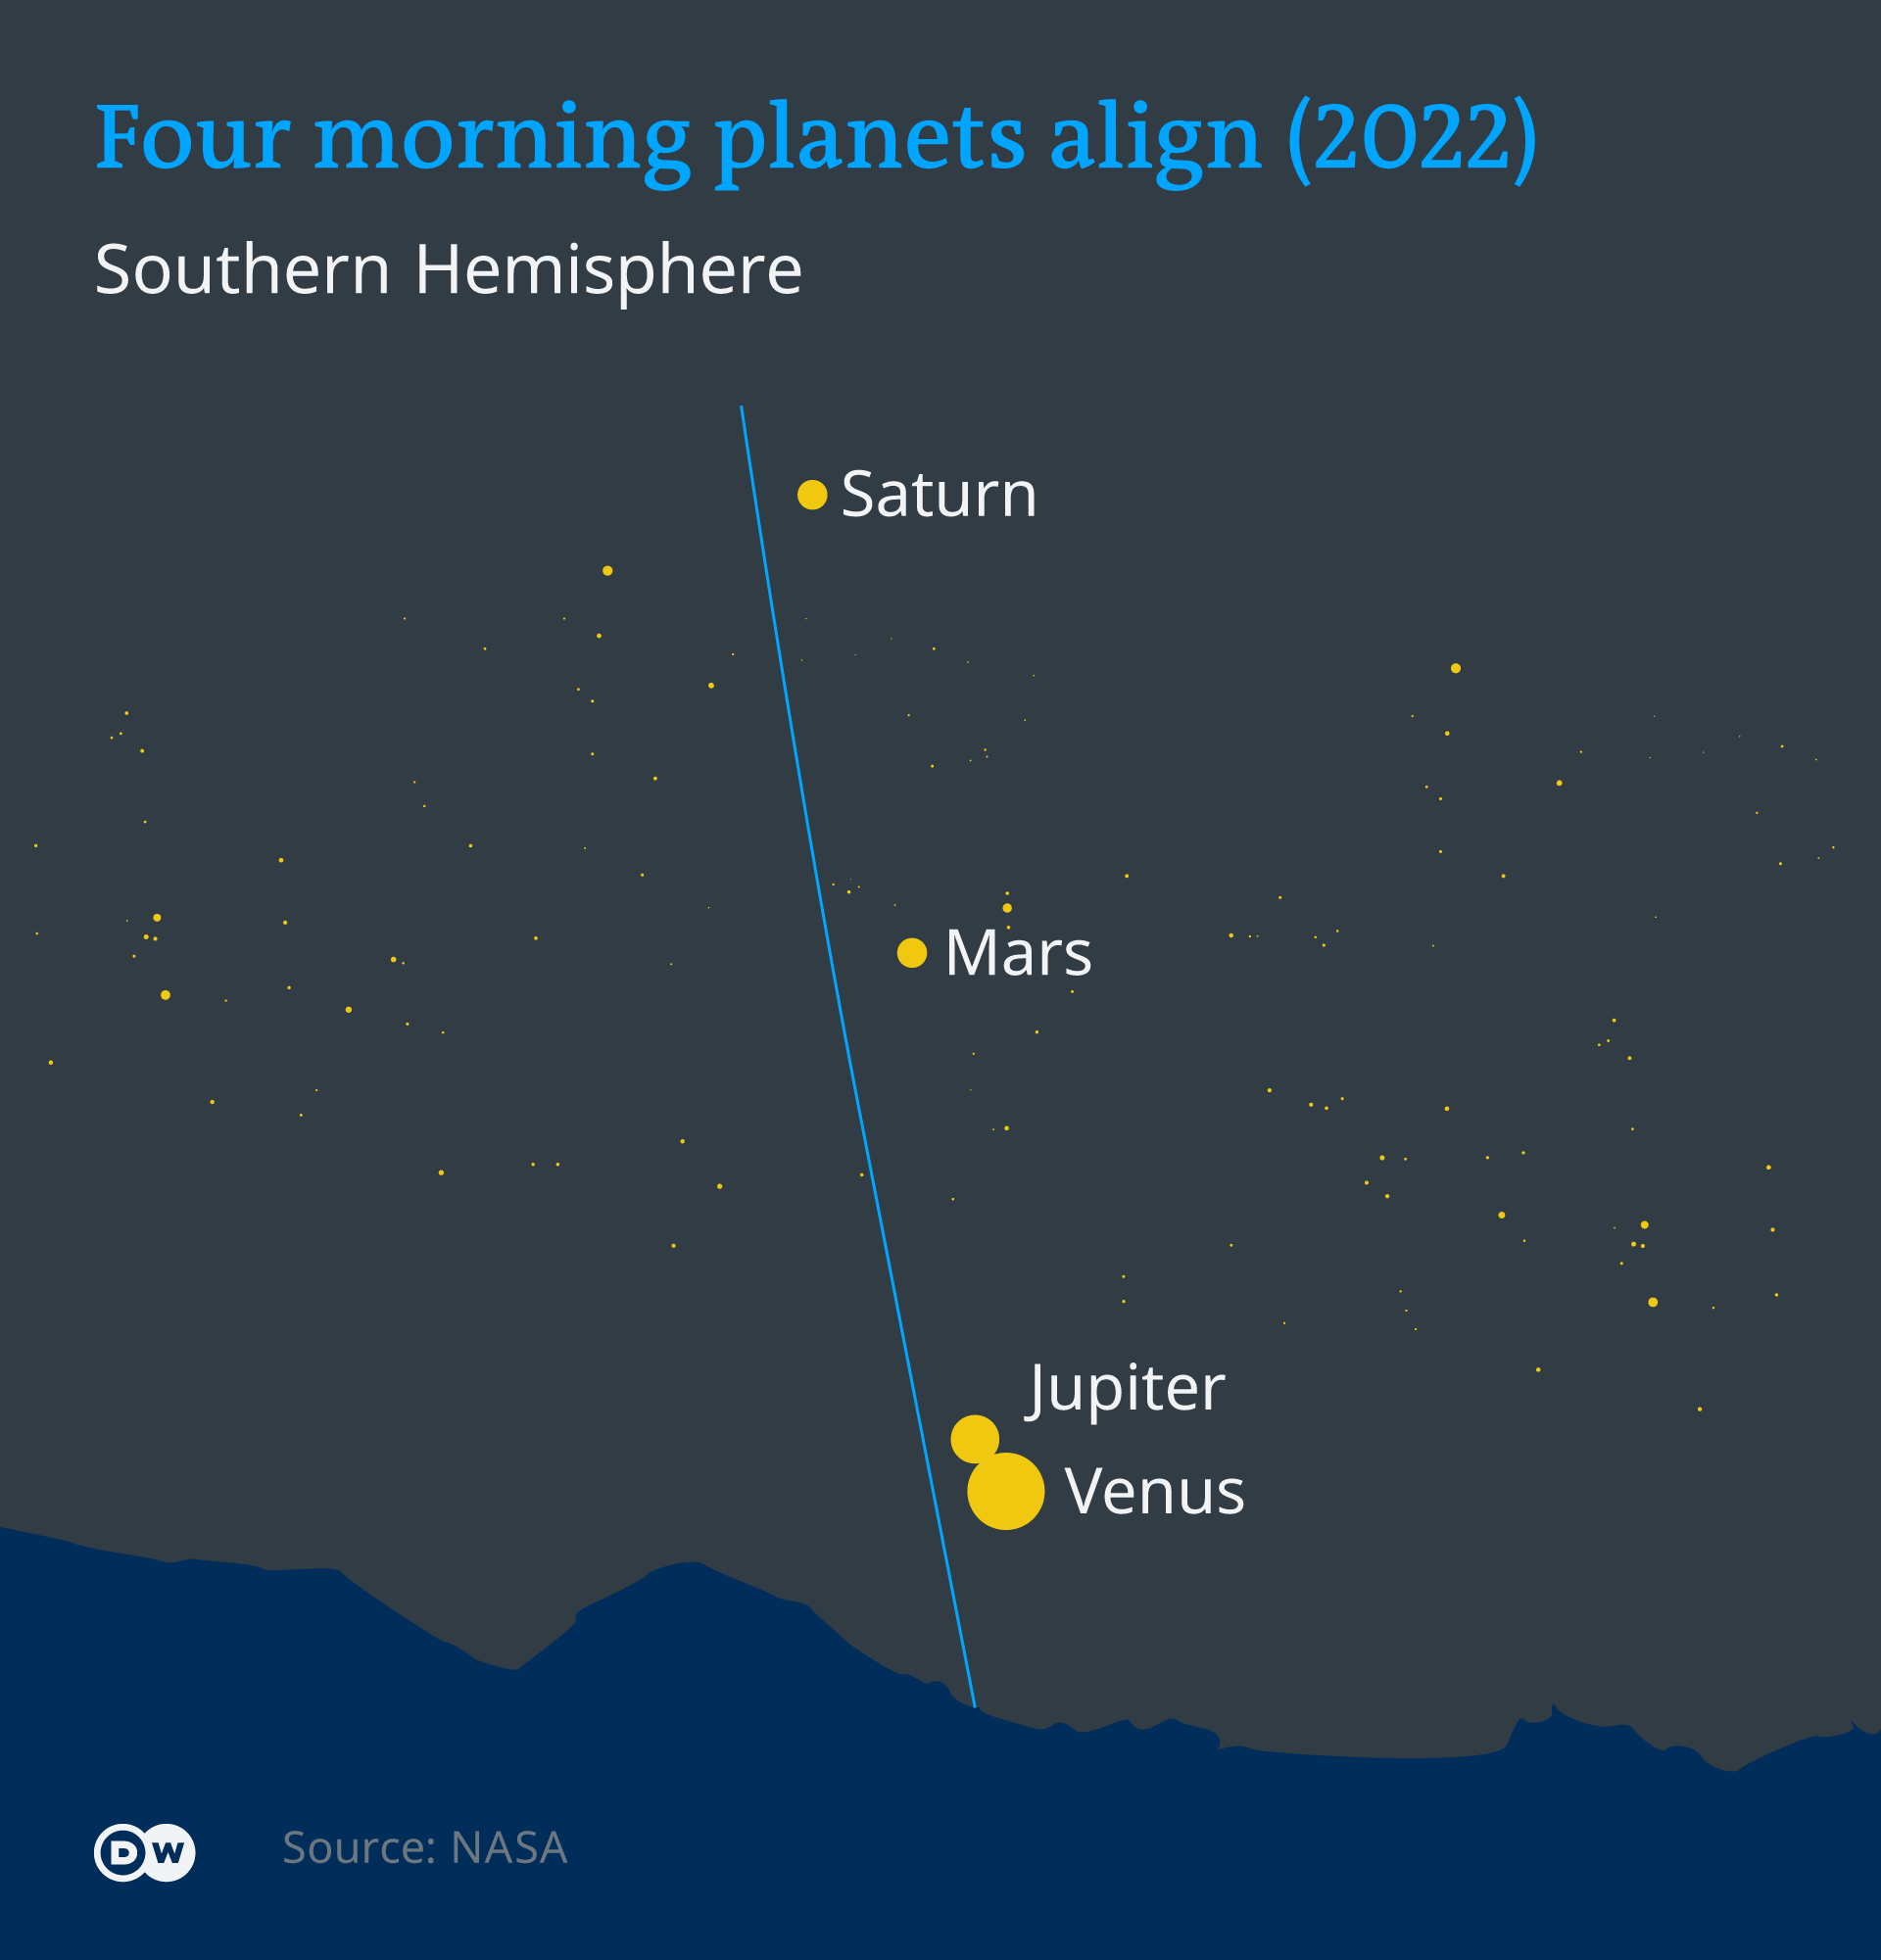 Infographic illustrating a four planet alignment in April 2022 as seen from the southern hemisphere, showing Venus and Jupiter as they appear to collide